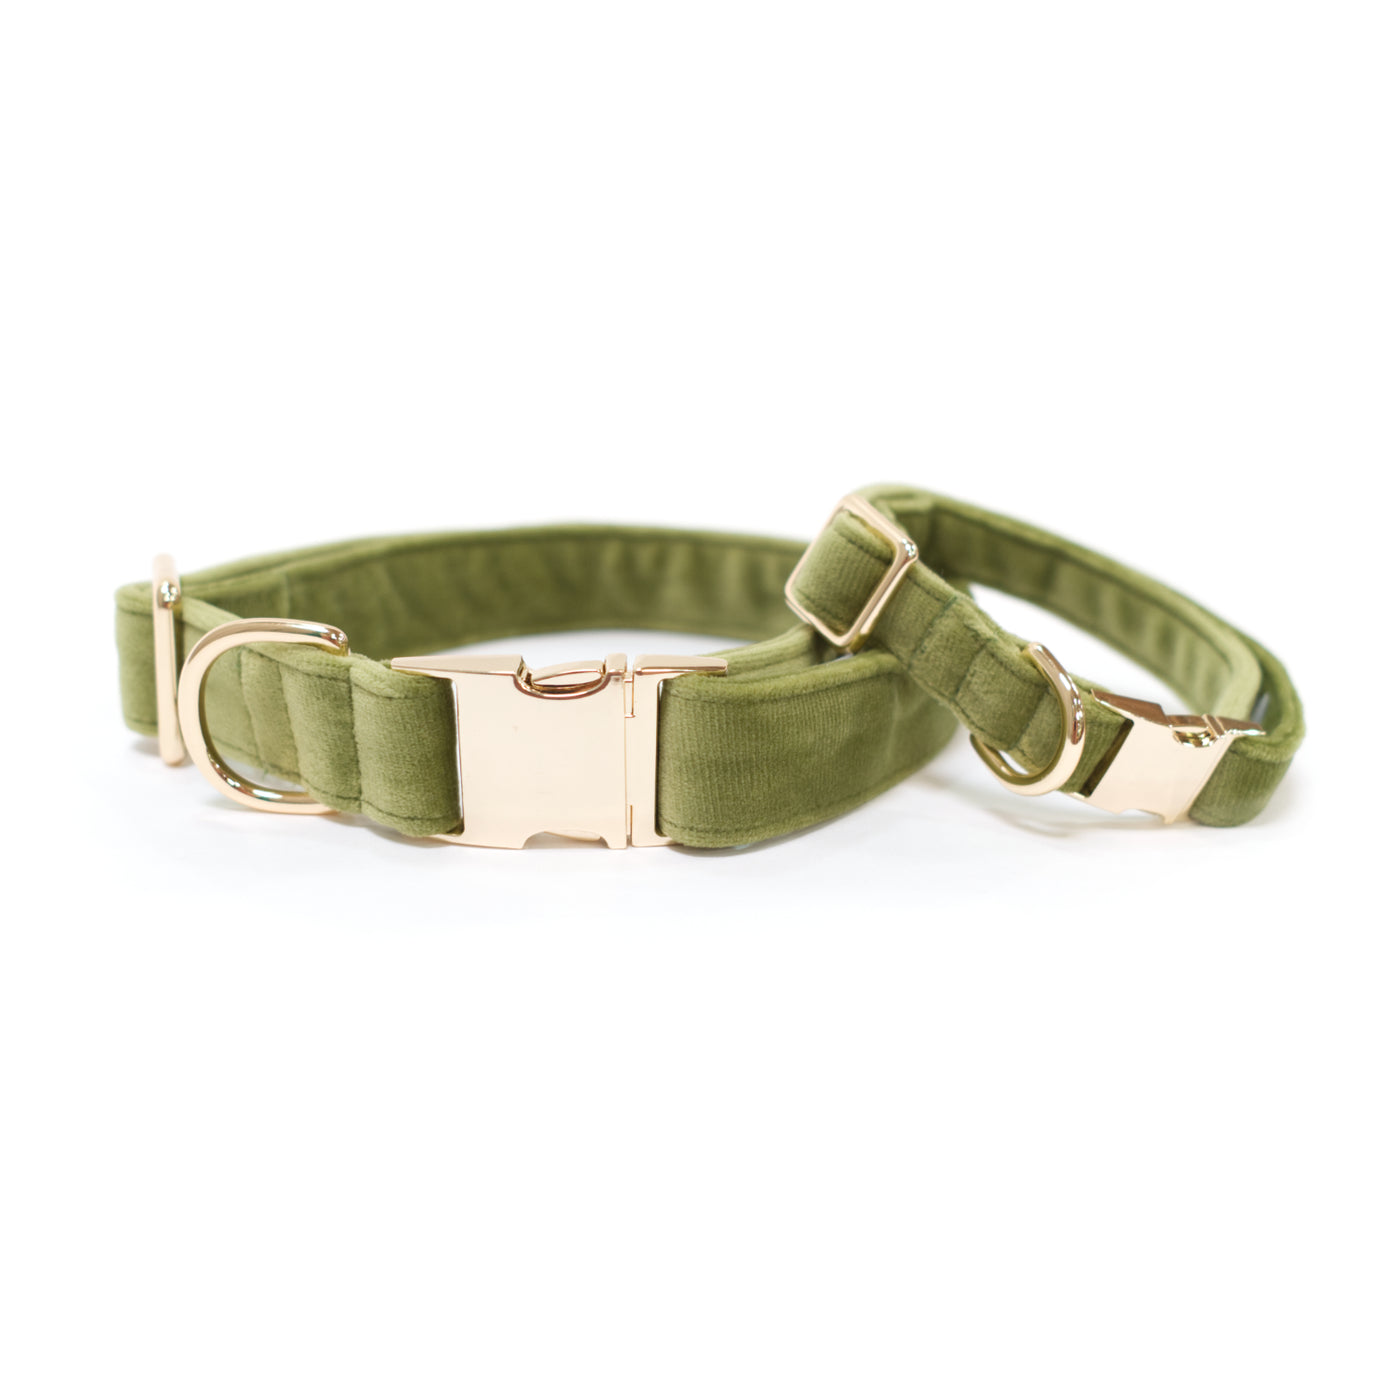 Moss green dog collar with gold hardware in sizes small and medium